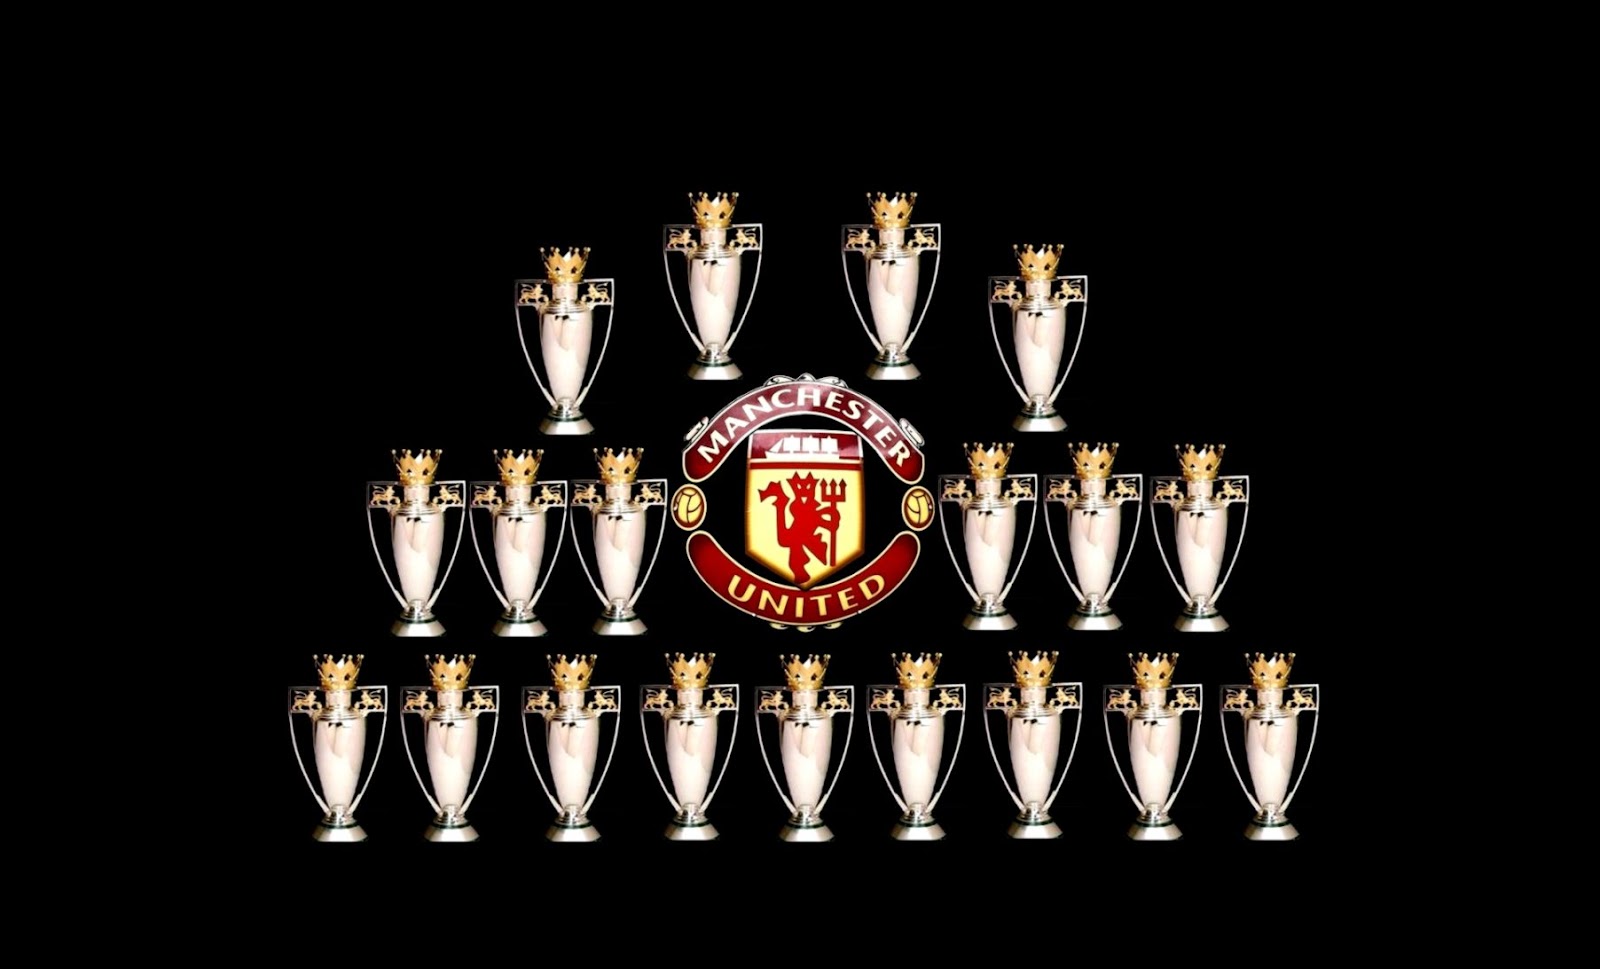 All Trophy Manchester United Wallpaper | High Definitions Wallpapers